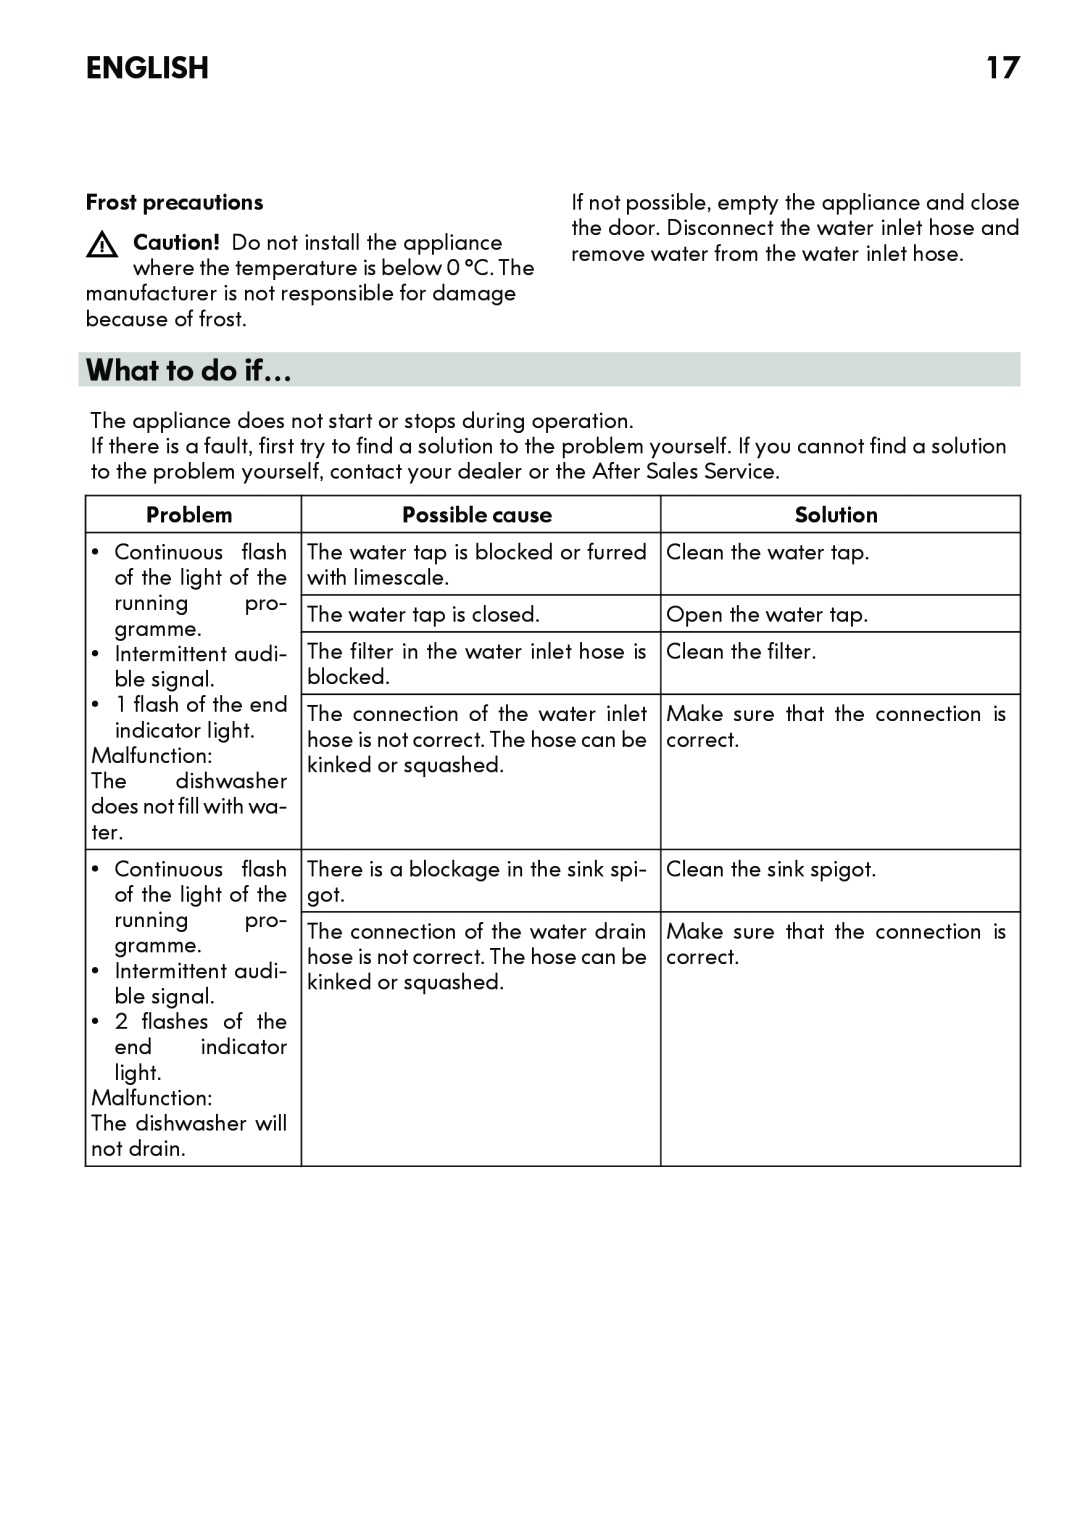 IKEA DW60 manual What to do if…, English, Frost precautions 